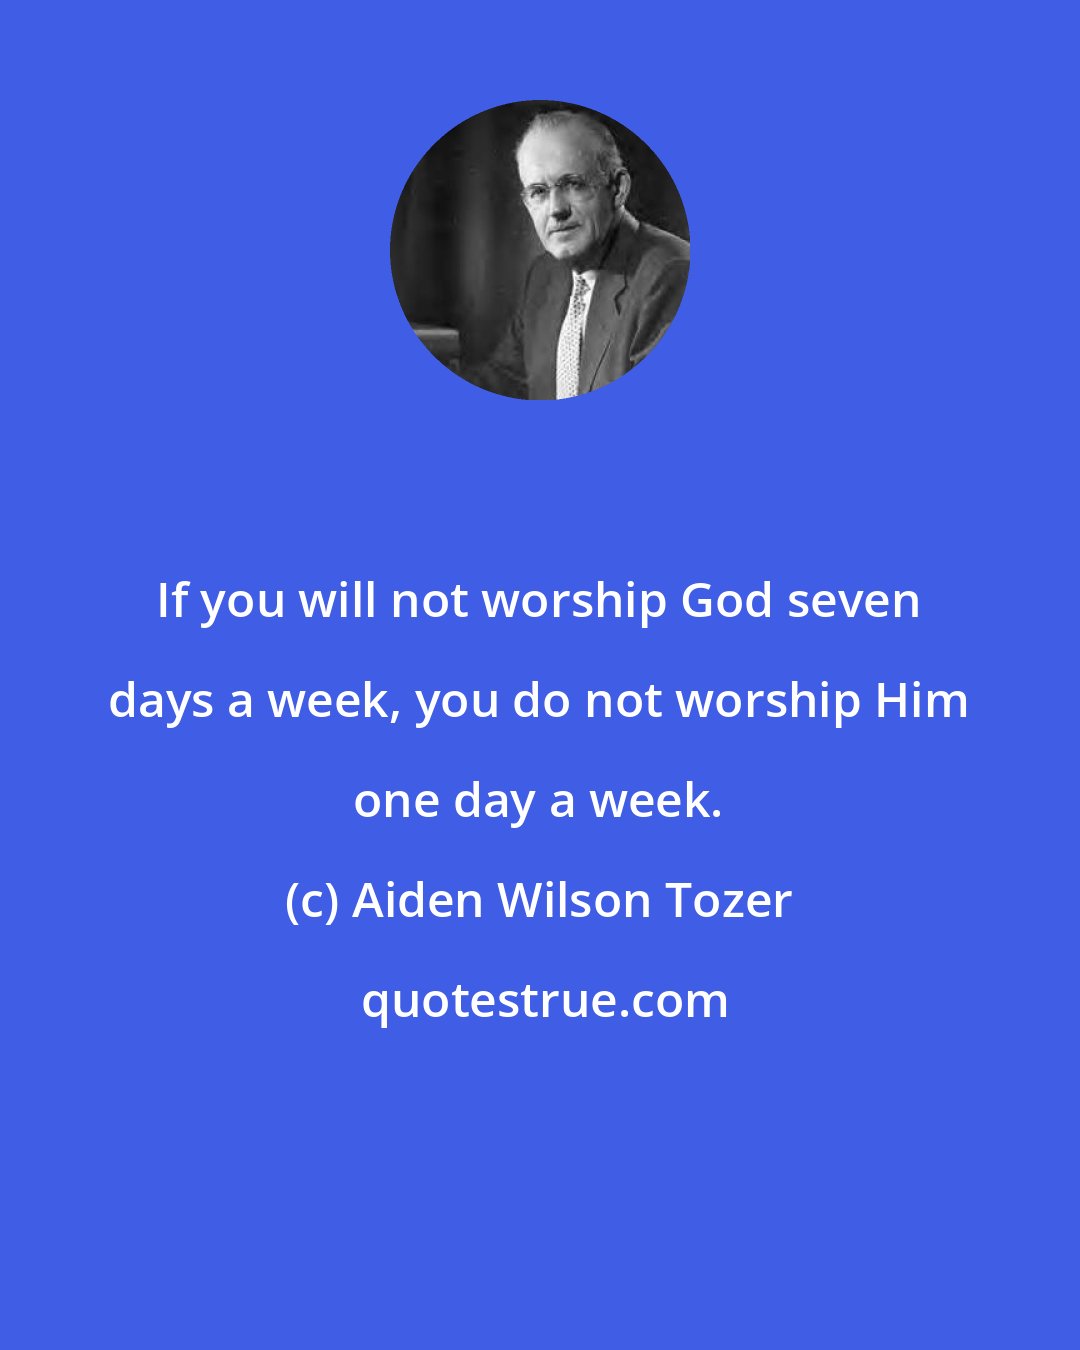 Aiden Wilson Tozer: If you will not worship God seven days a week, you do not worship Him one day a week.